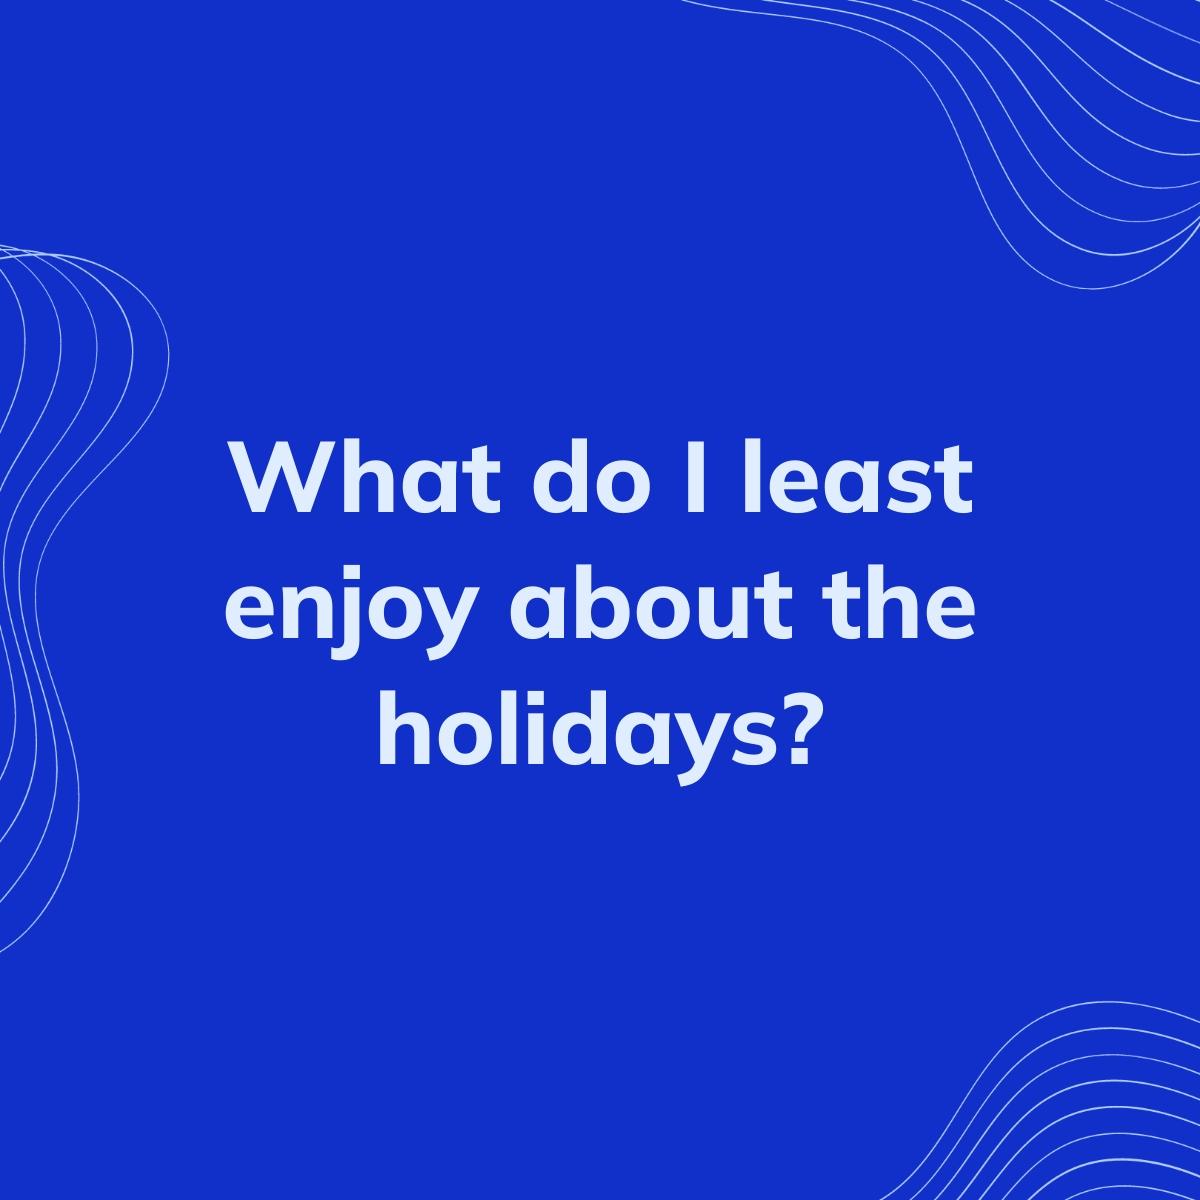 Journal Prompt: What do I least enjoy about the holidays?